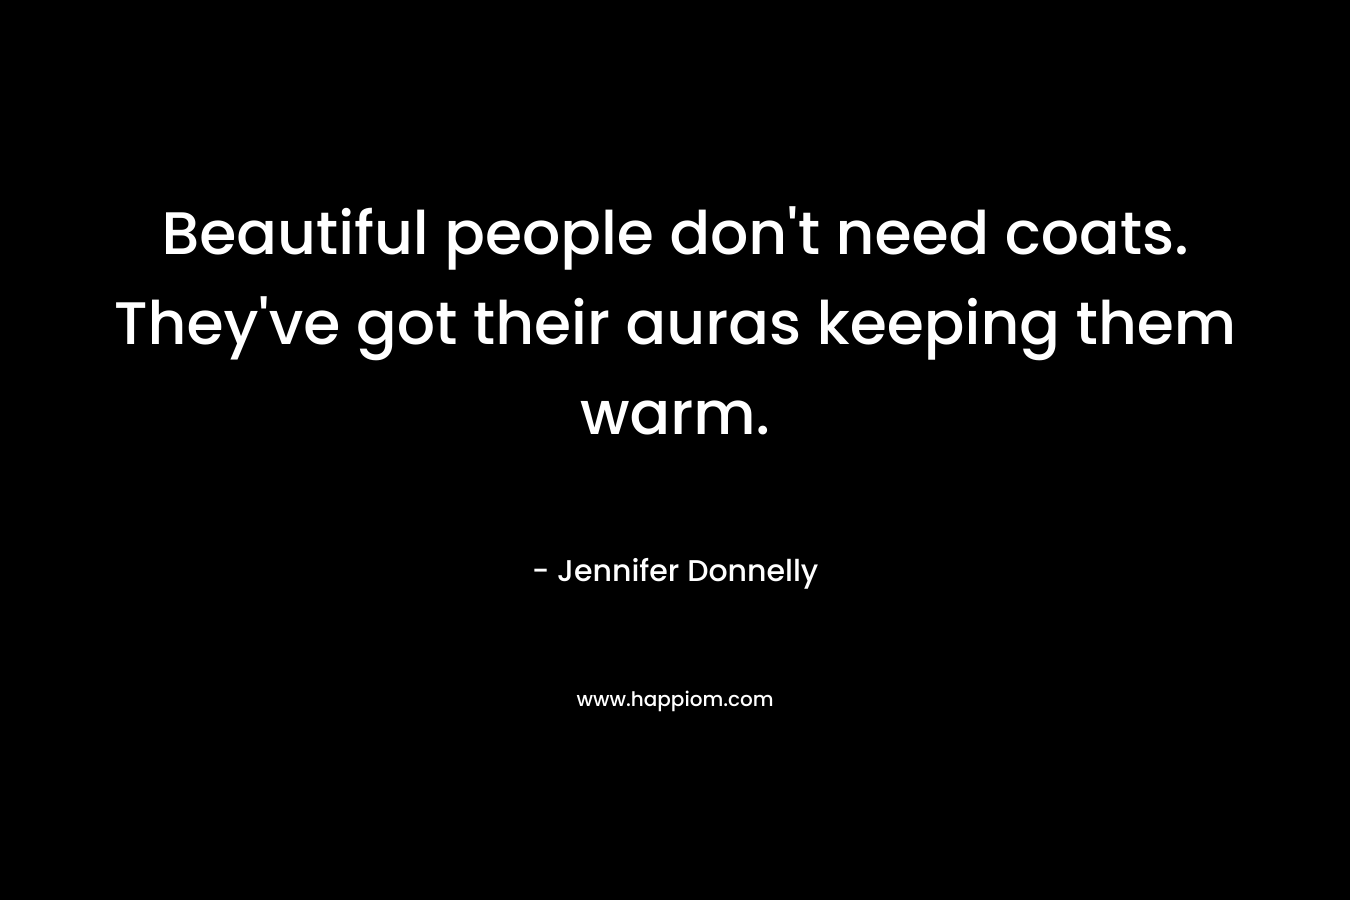 Beautiful people don’t need coats. They’ve got their auras keeping them warm. – Jennifer Donnelly